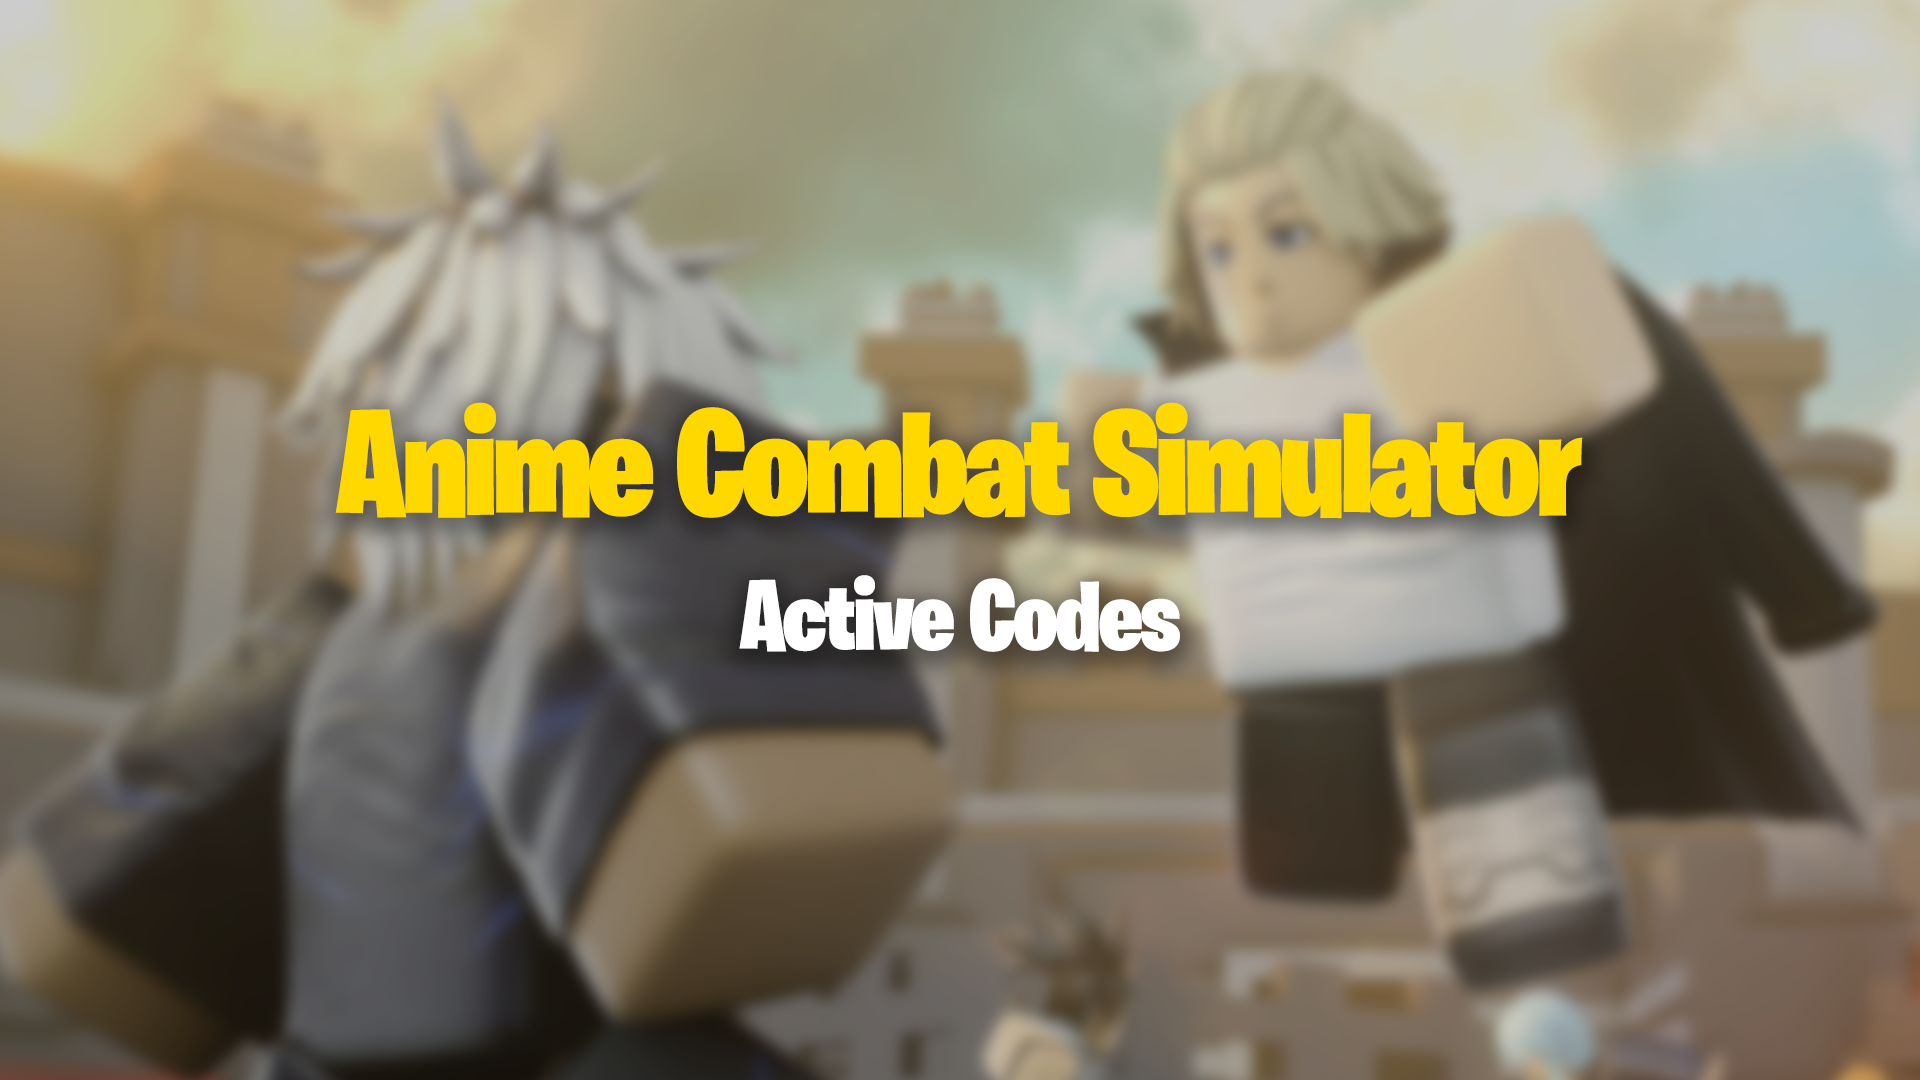 Anime Attack Simulator codes (December 2023) — free yen and